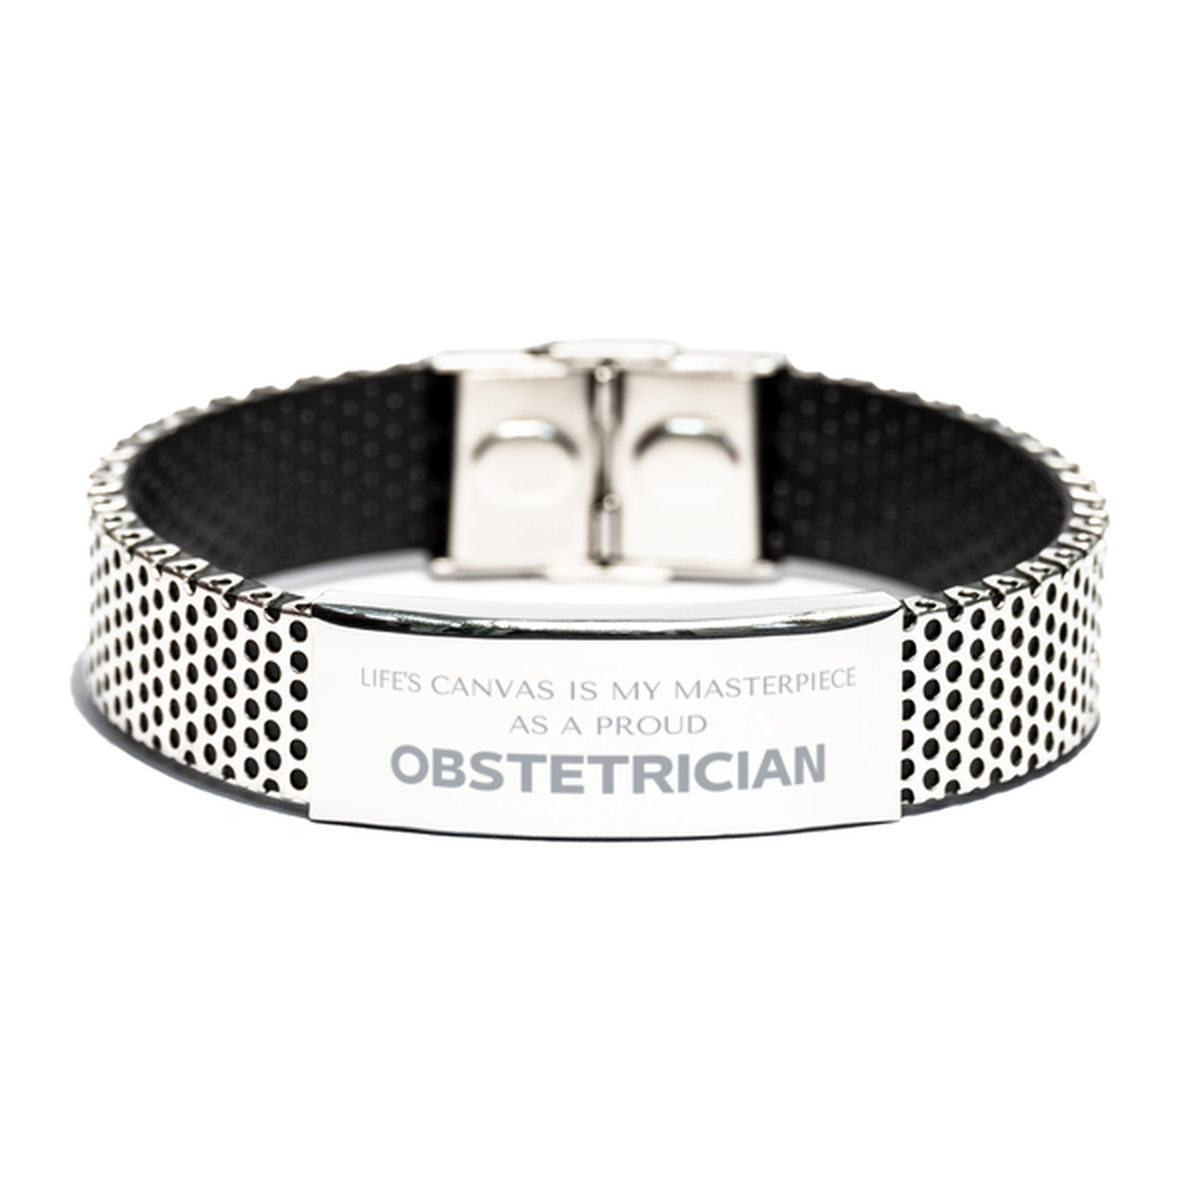 Proud Obstetrician Gifts, Life's canvas is my masterpiece, Epic Birthday Christmas Unique Stainless Steel Bracelet For Obstetrician, Coworkers, Men, Women, Friends